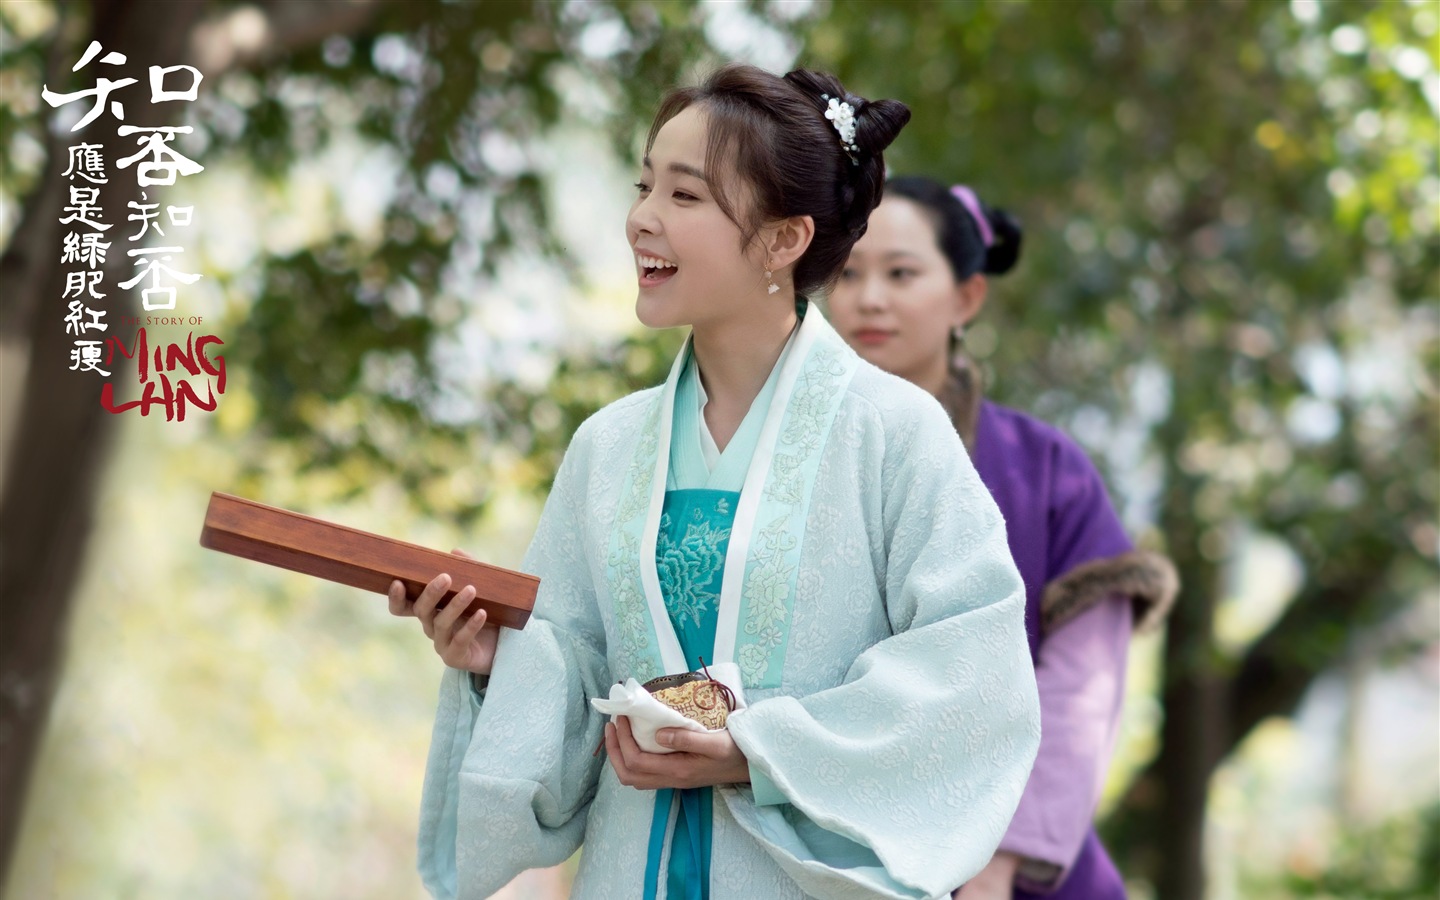 The Story Of MingLan, TV series HD wallpapers #15 - 1440x900